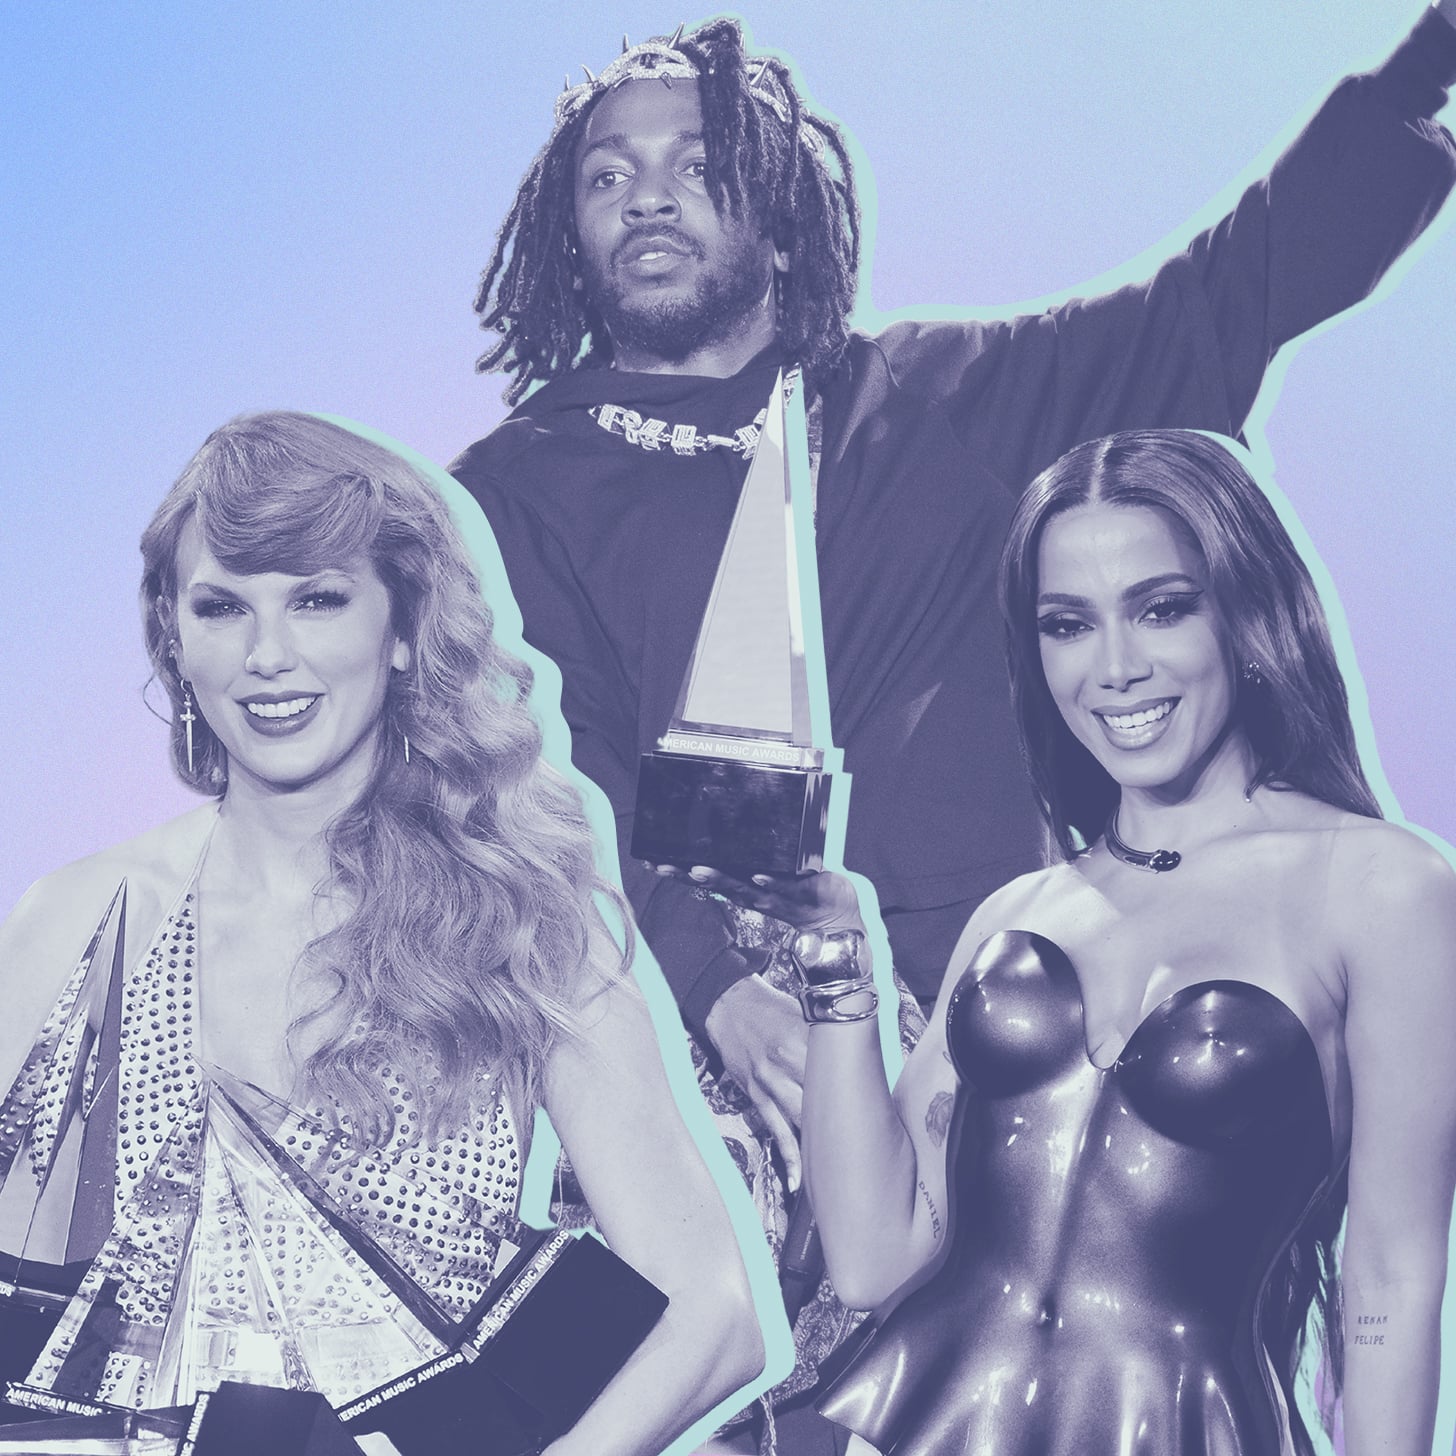 2022 American Music Awards Winners: The Complete List